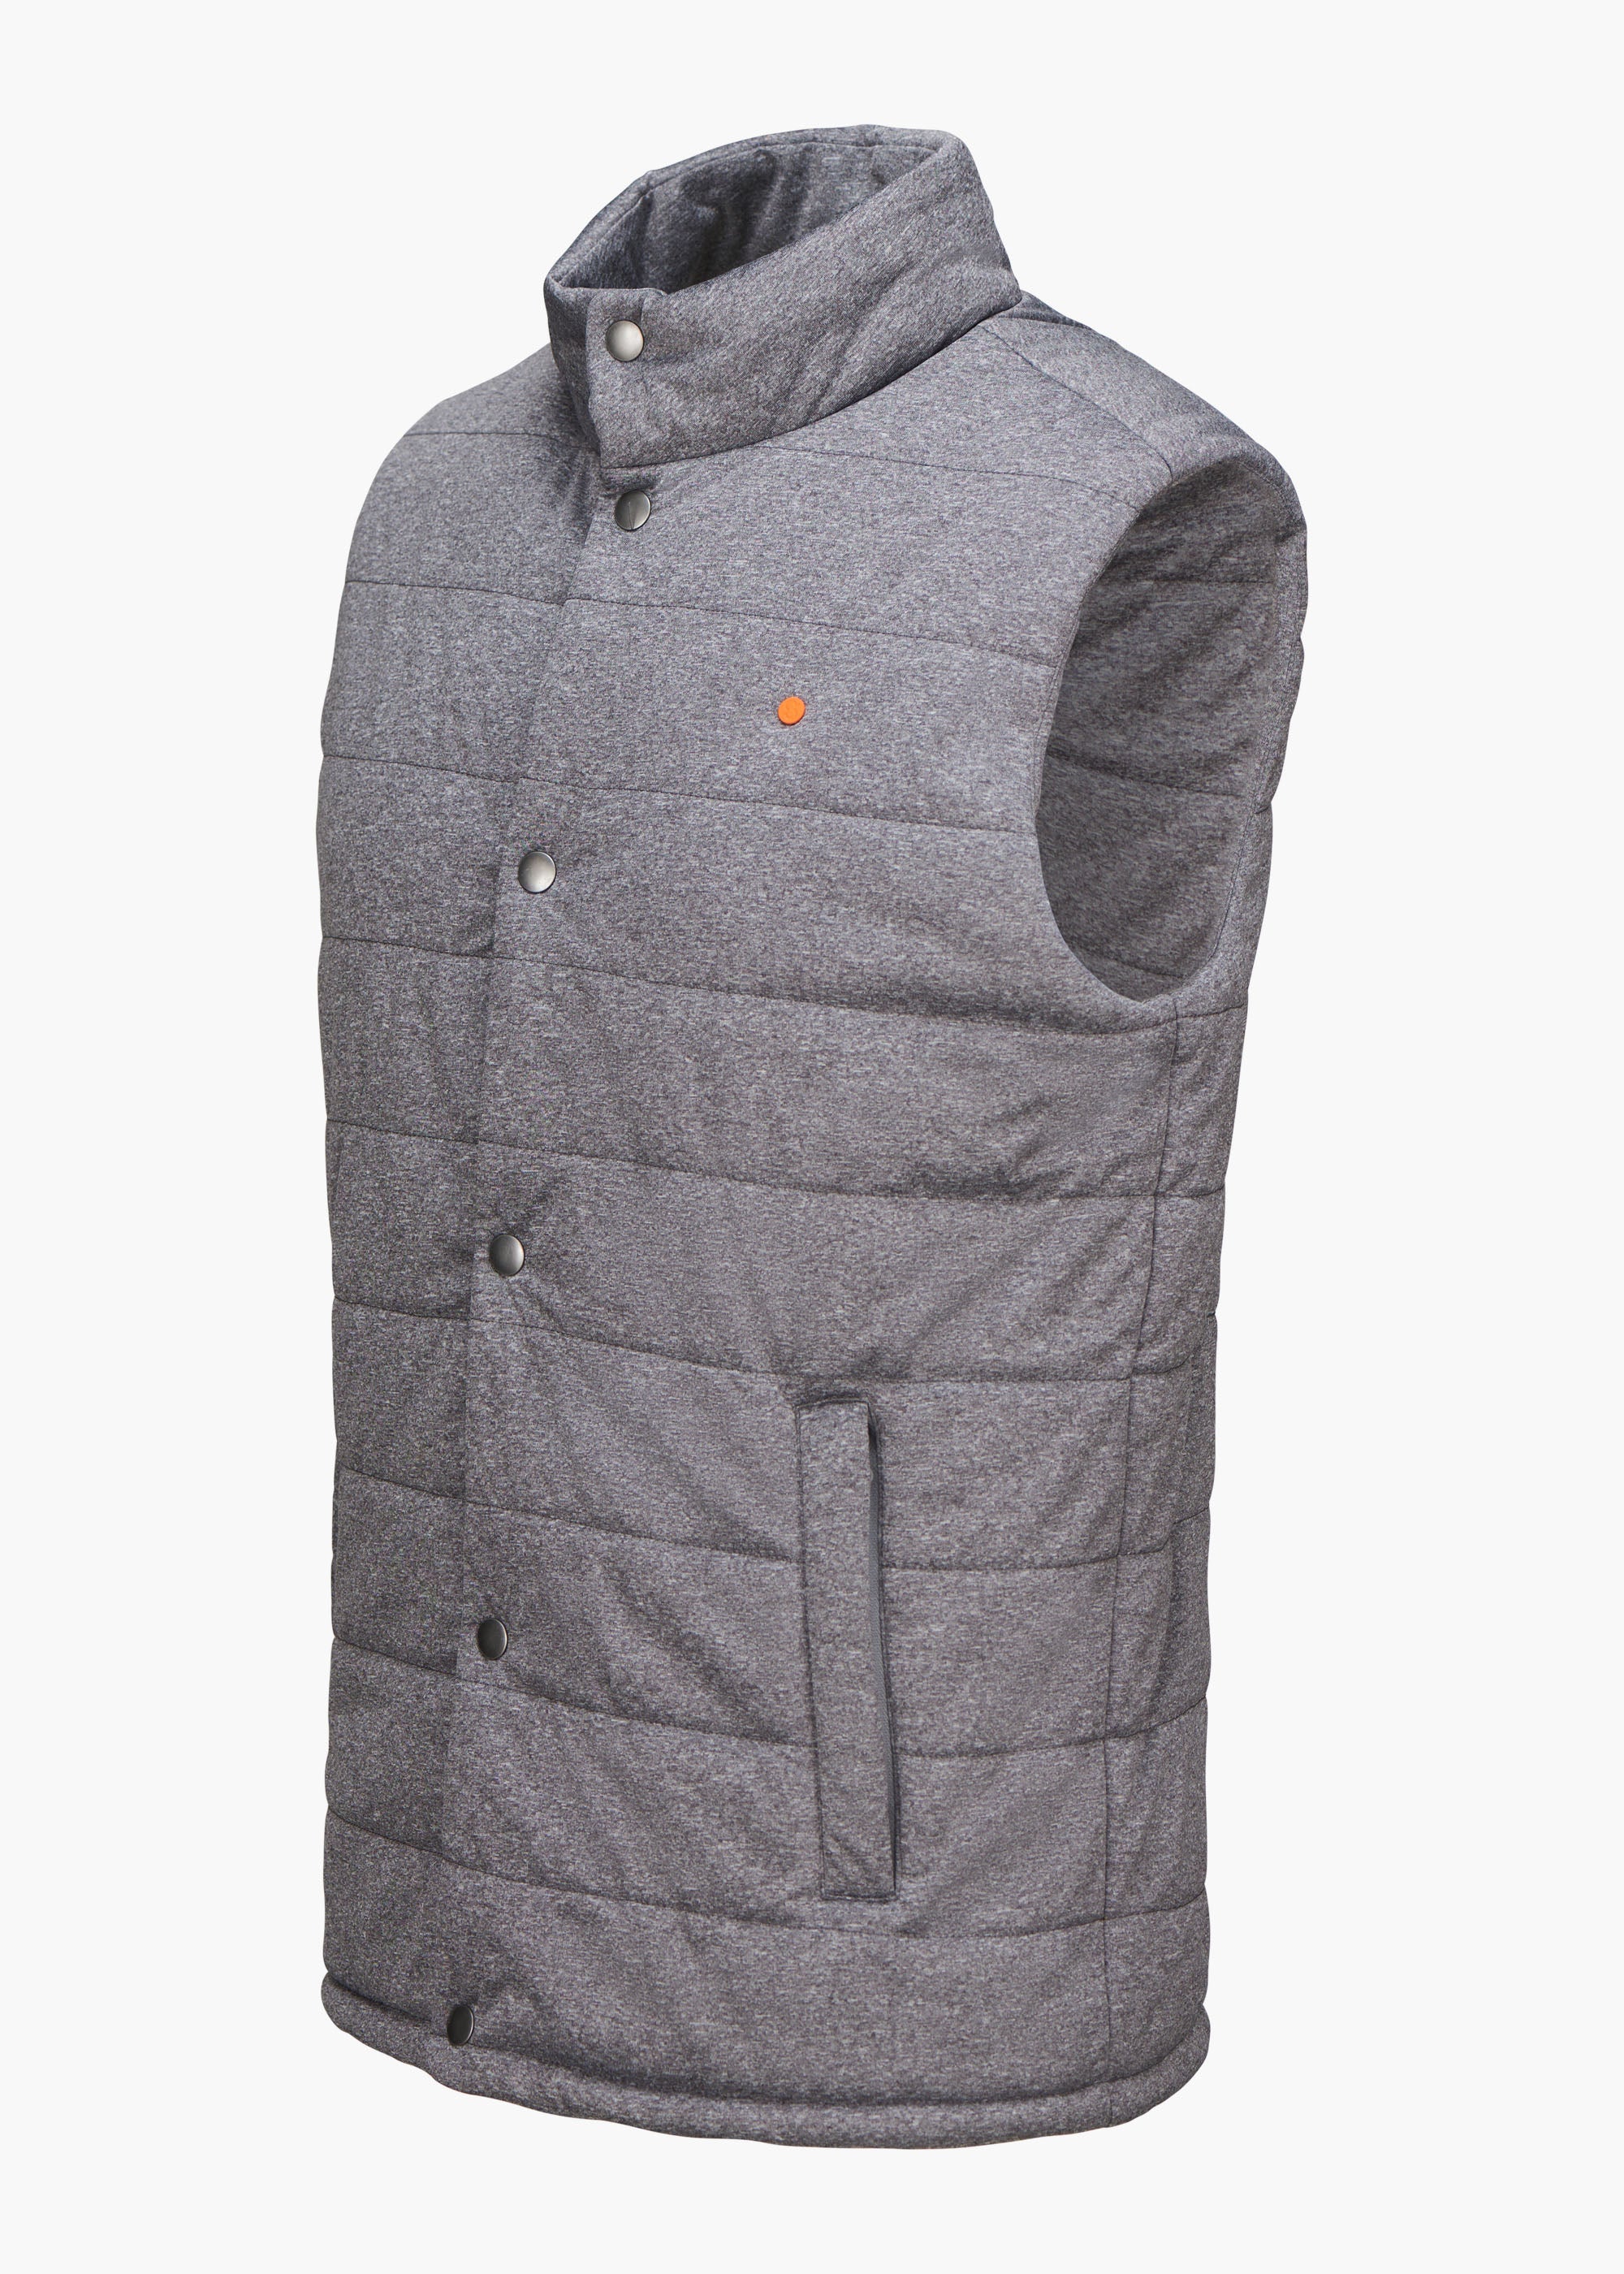 Vippa Gilet - background::white,variant::Drizzle